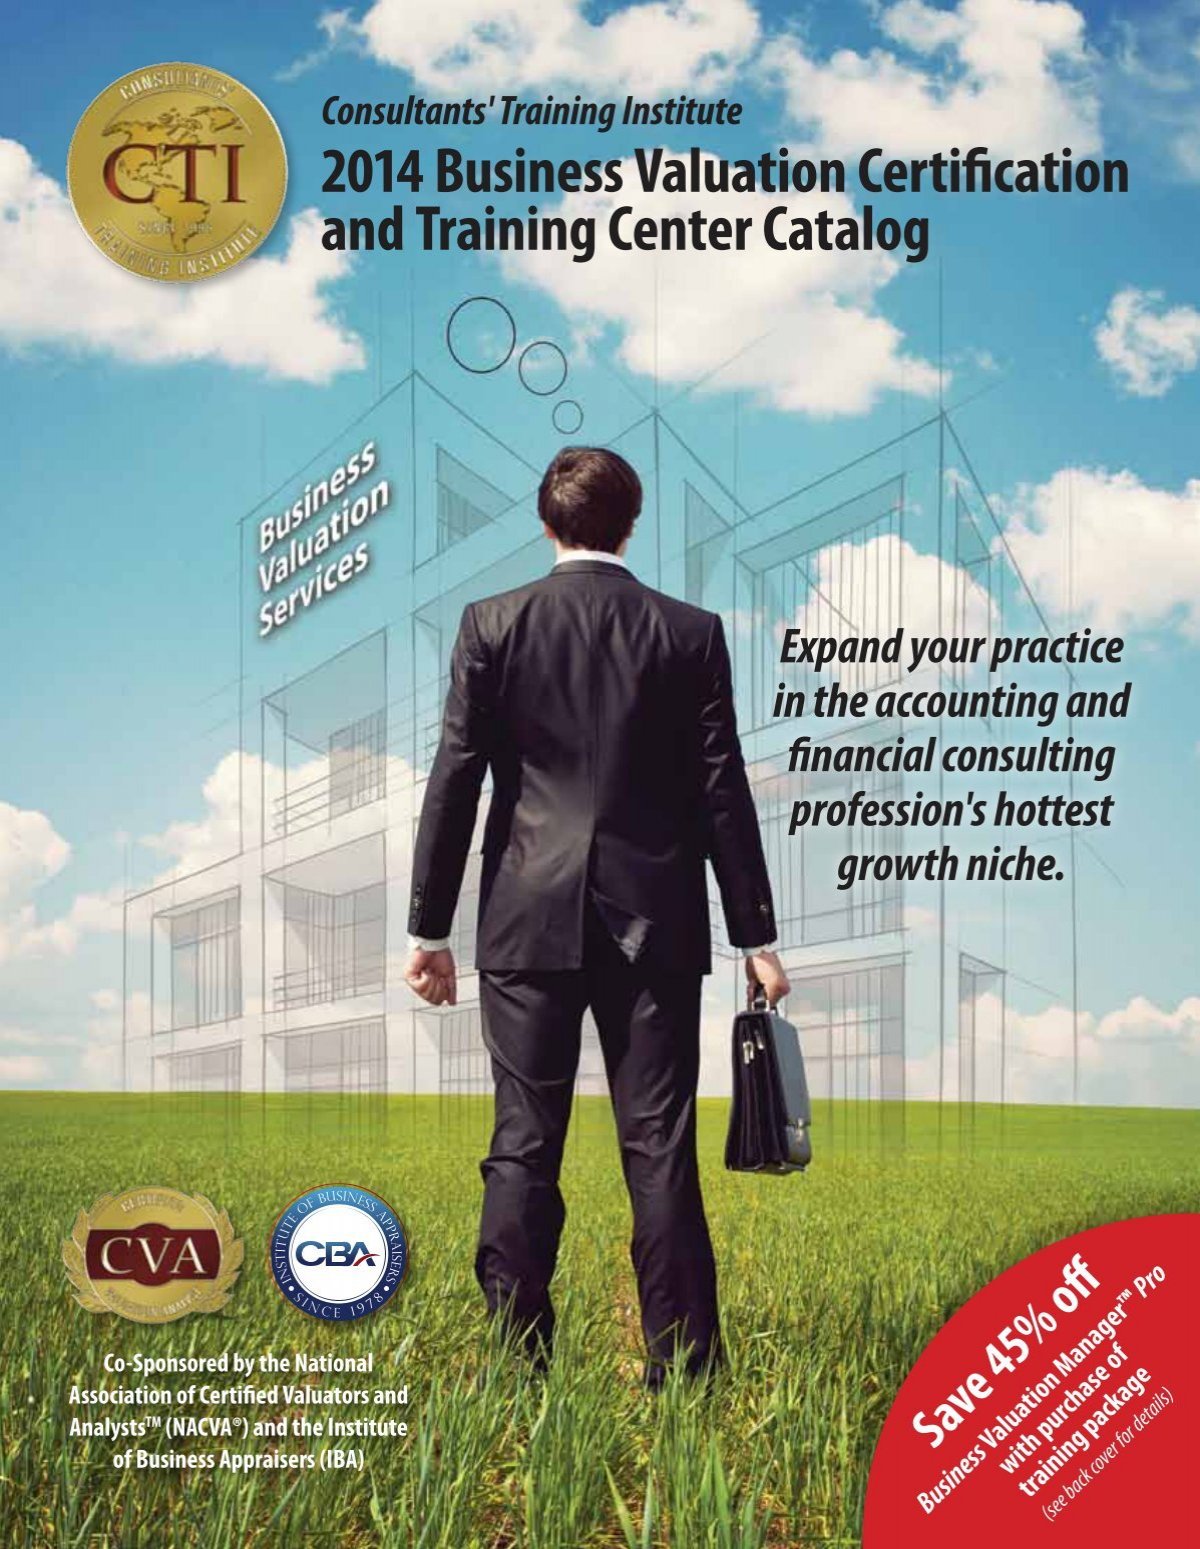 Business Valuation Certification and Training Center Catalog